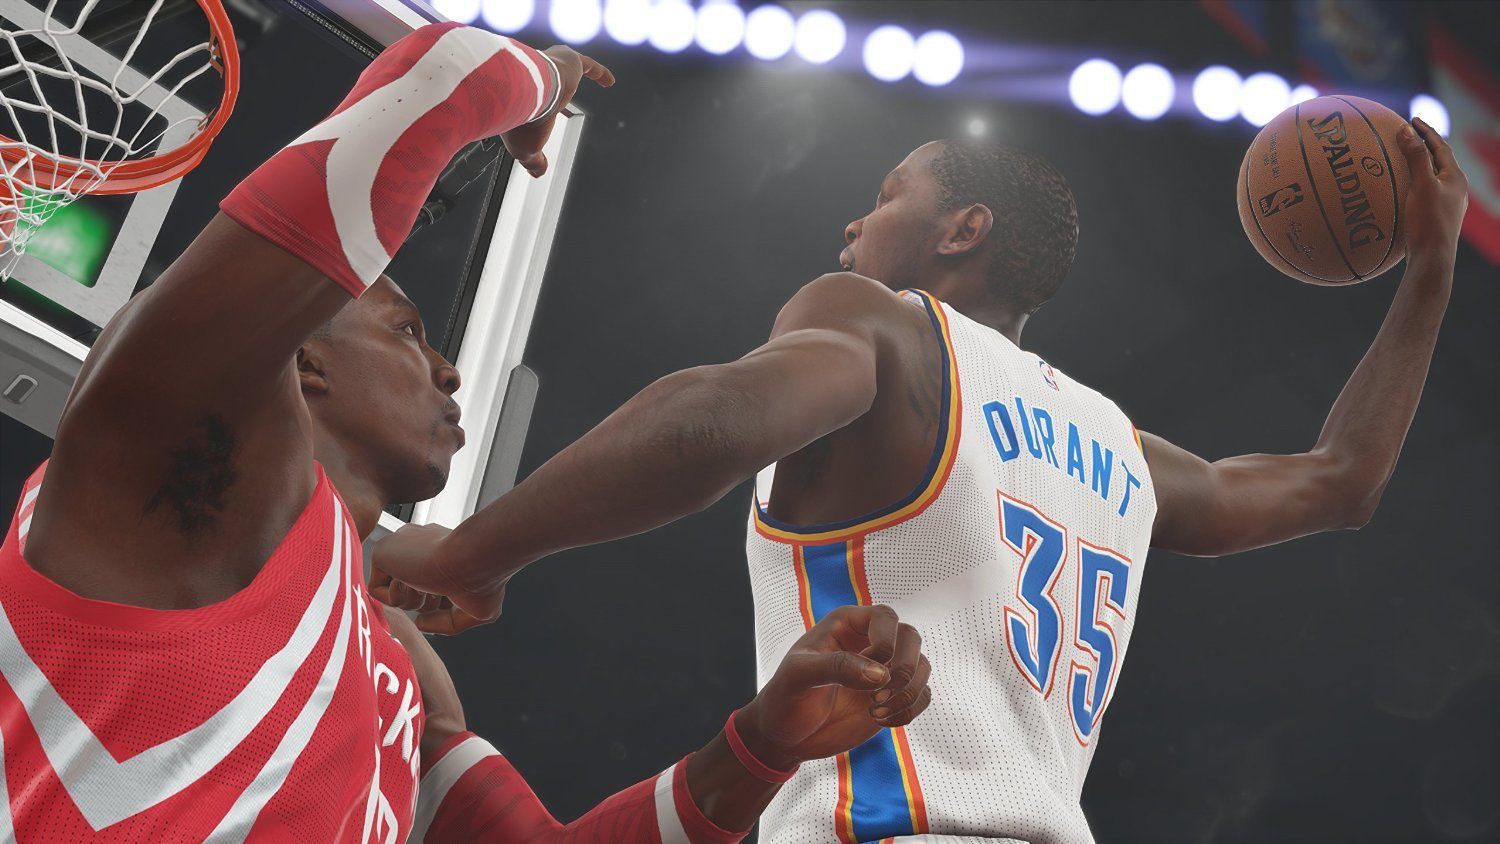 A week before the NBA 2K15 release you can save $25 on your pre-order.